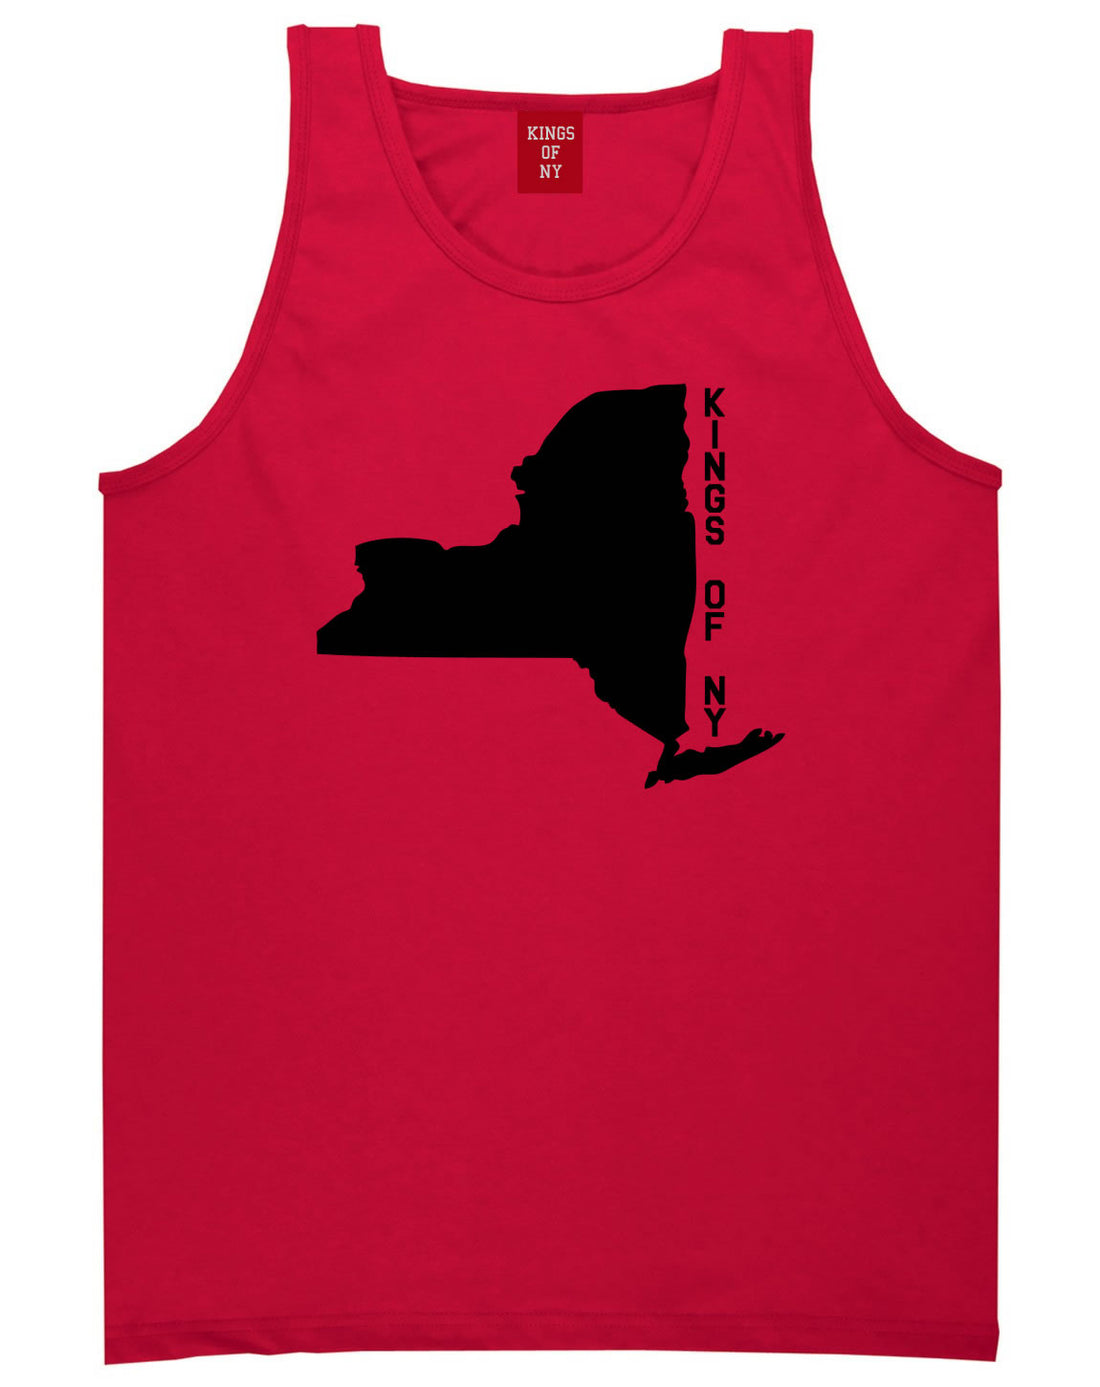 New York State Shape Tank Top in Red By Kings Of NY